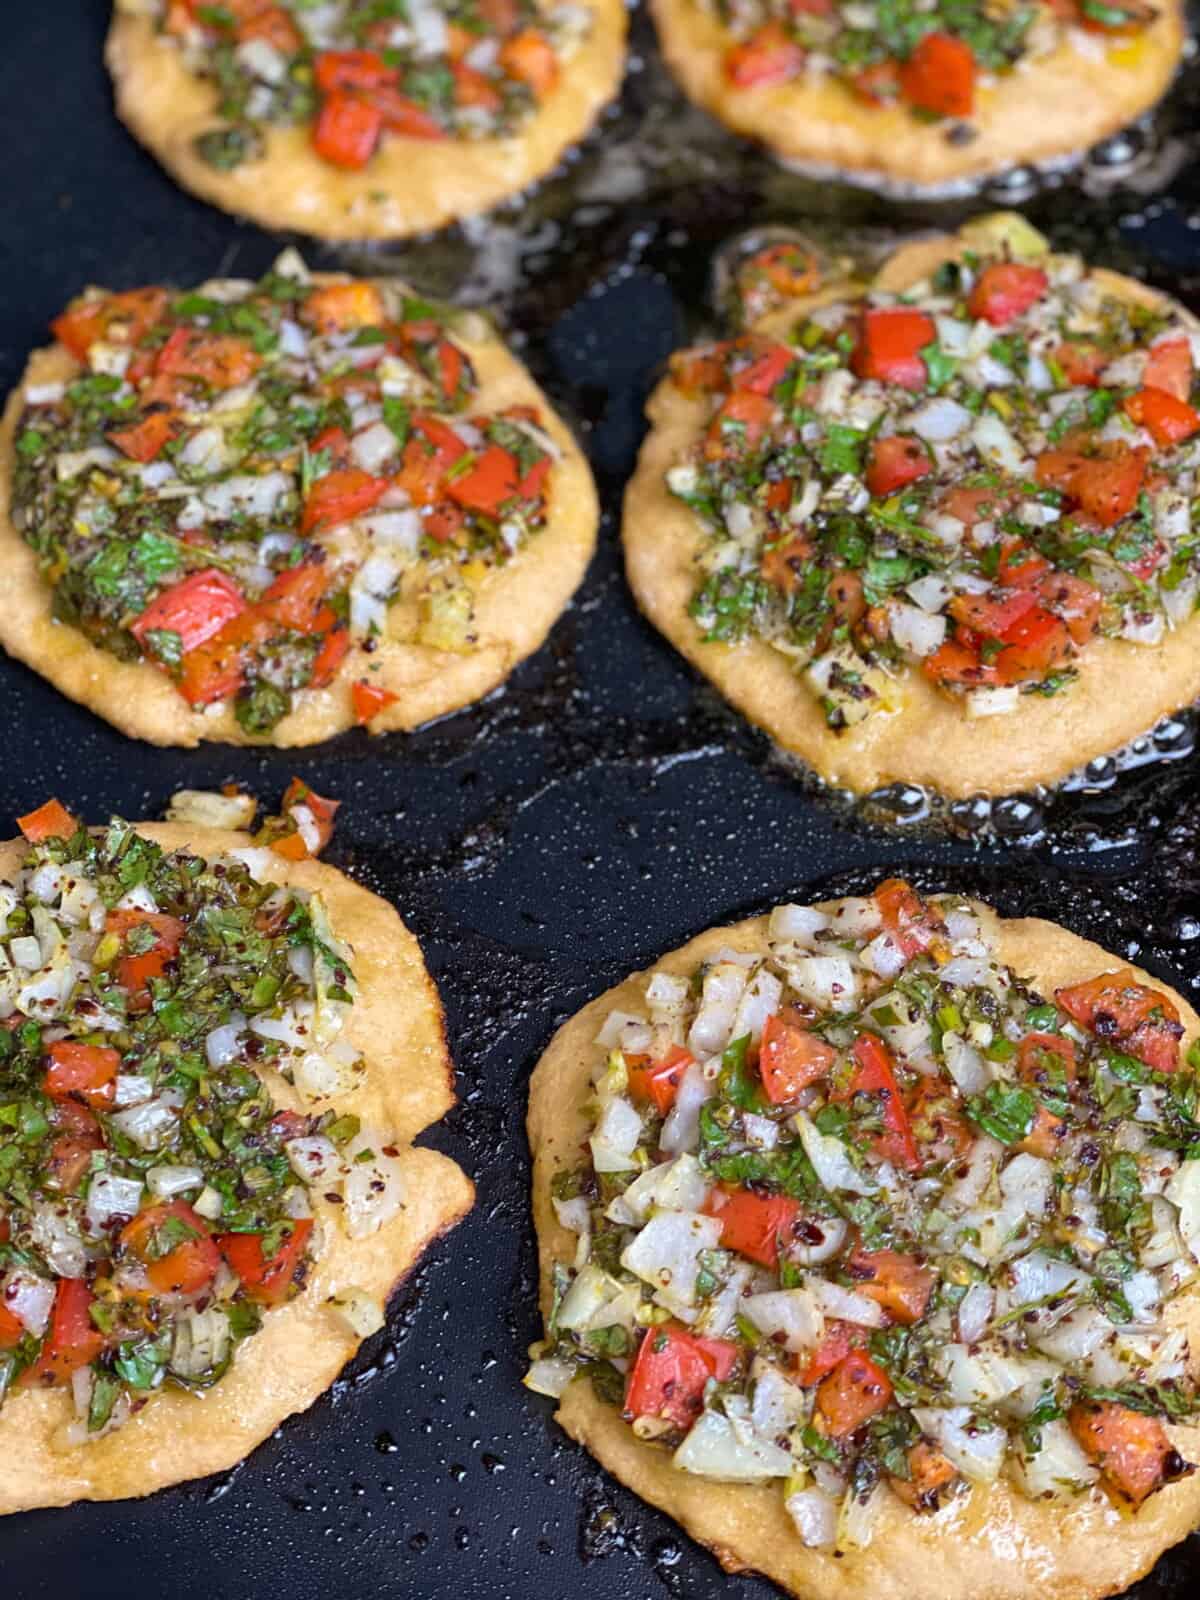 Mini veggie pizza pies topped with a mix of tomatoes, onions, sumac, olive oil, dried mints, and parsley, against a pan sizzling with oil.